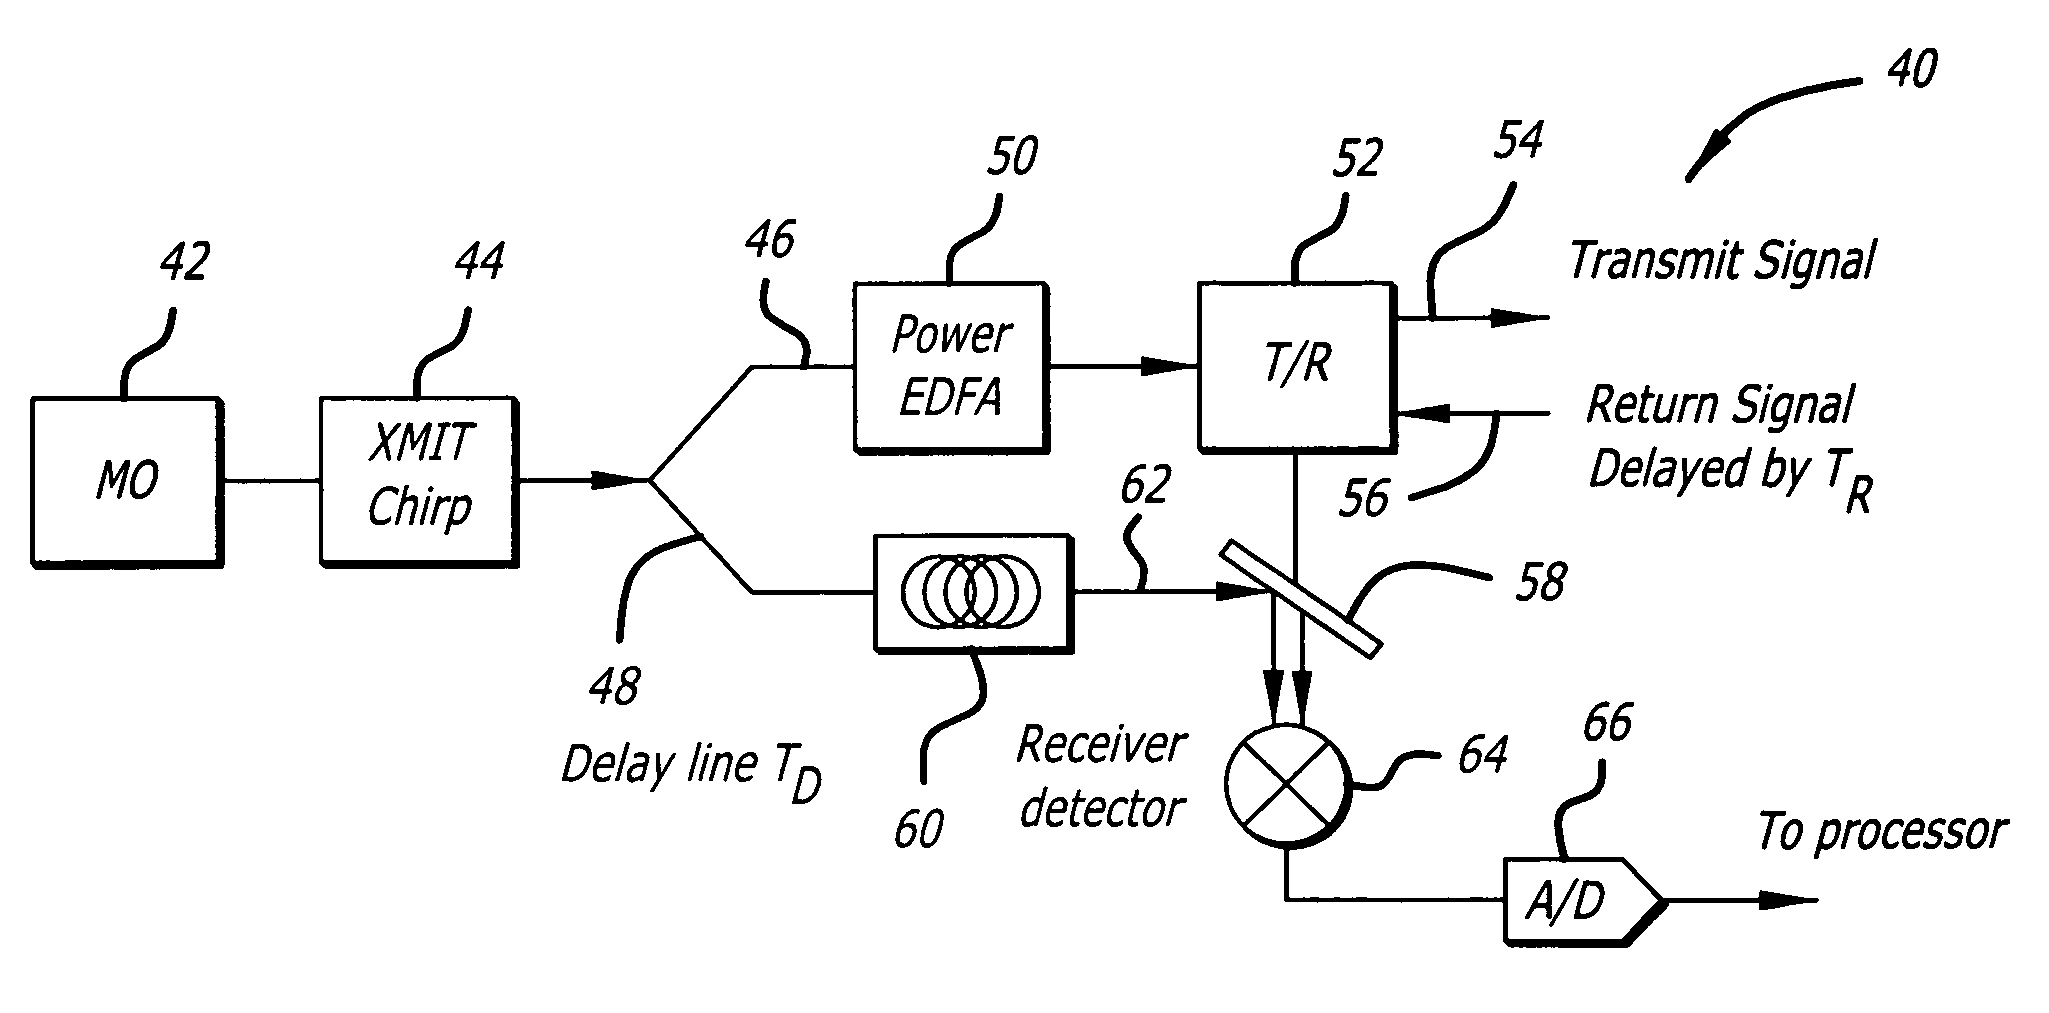 Optical delay line to correct phase errors in coherent ladar